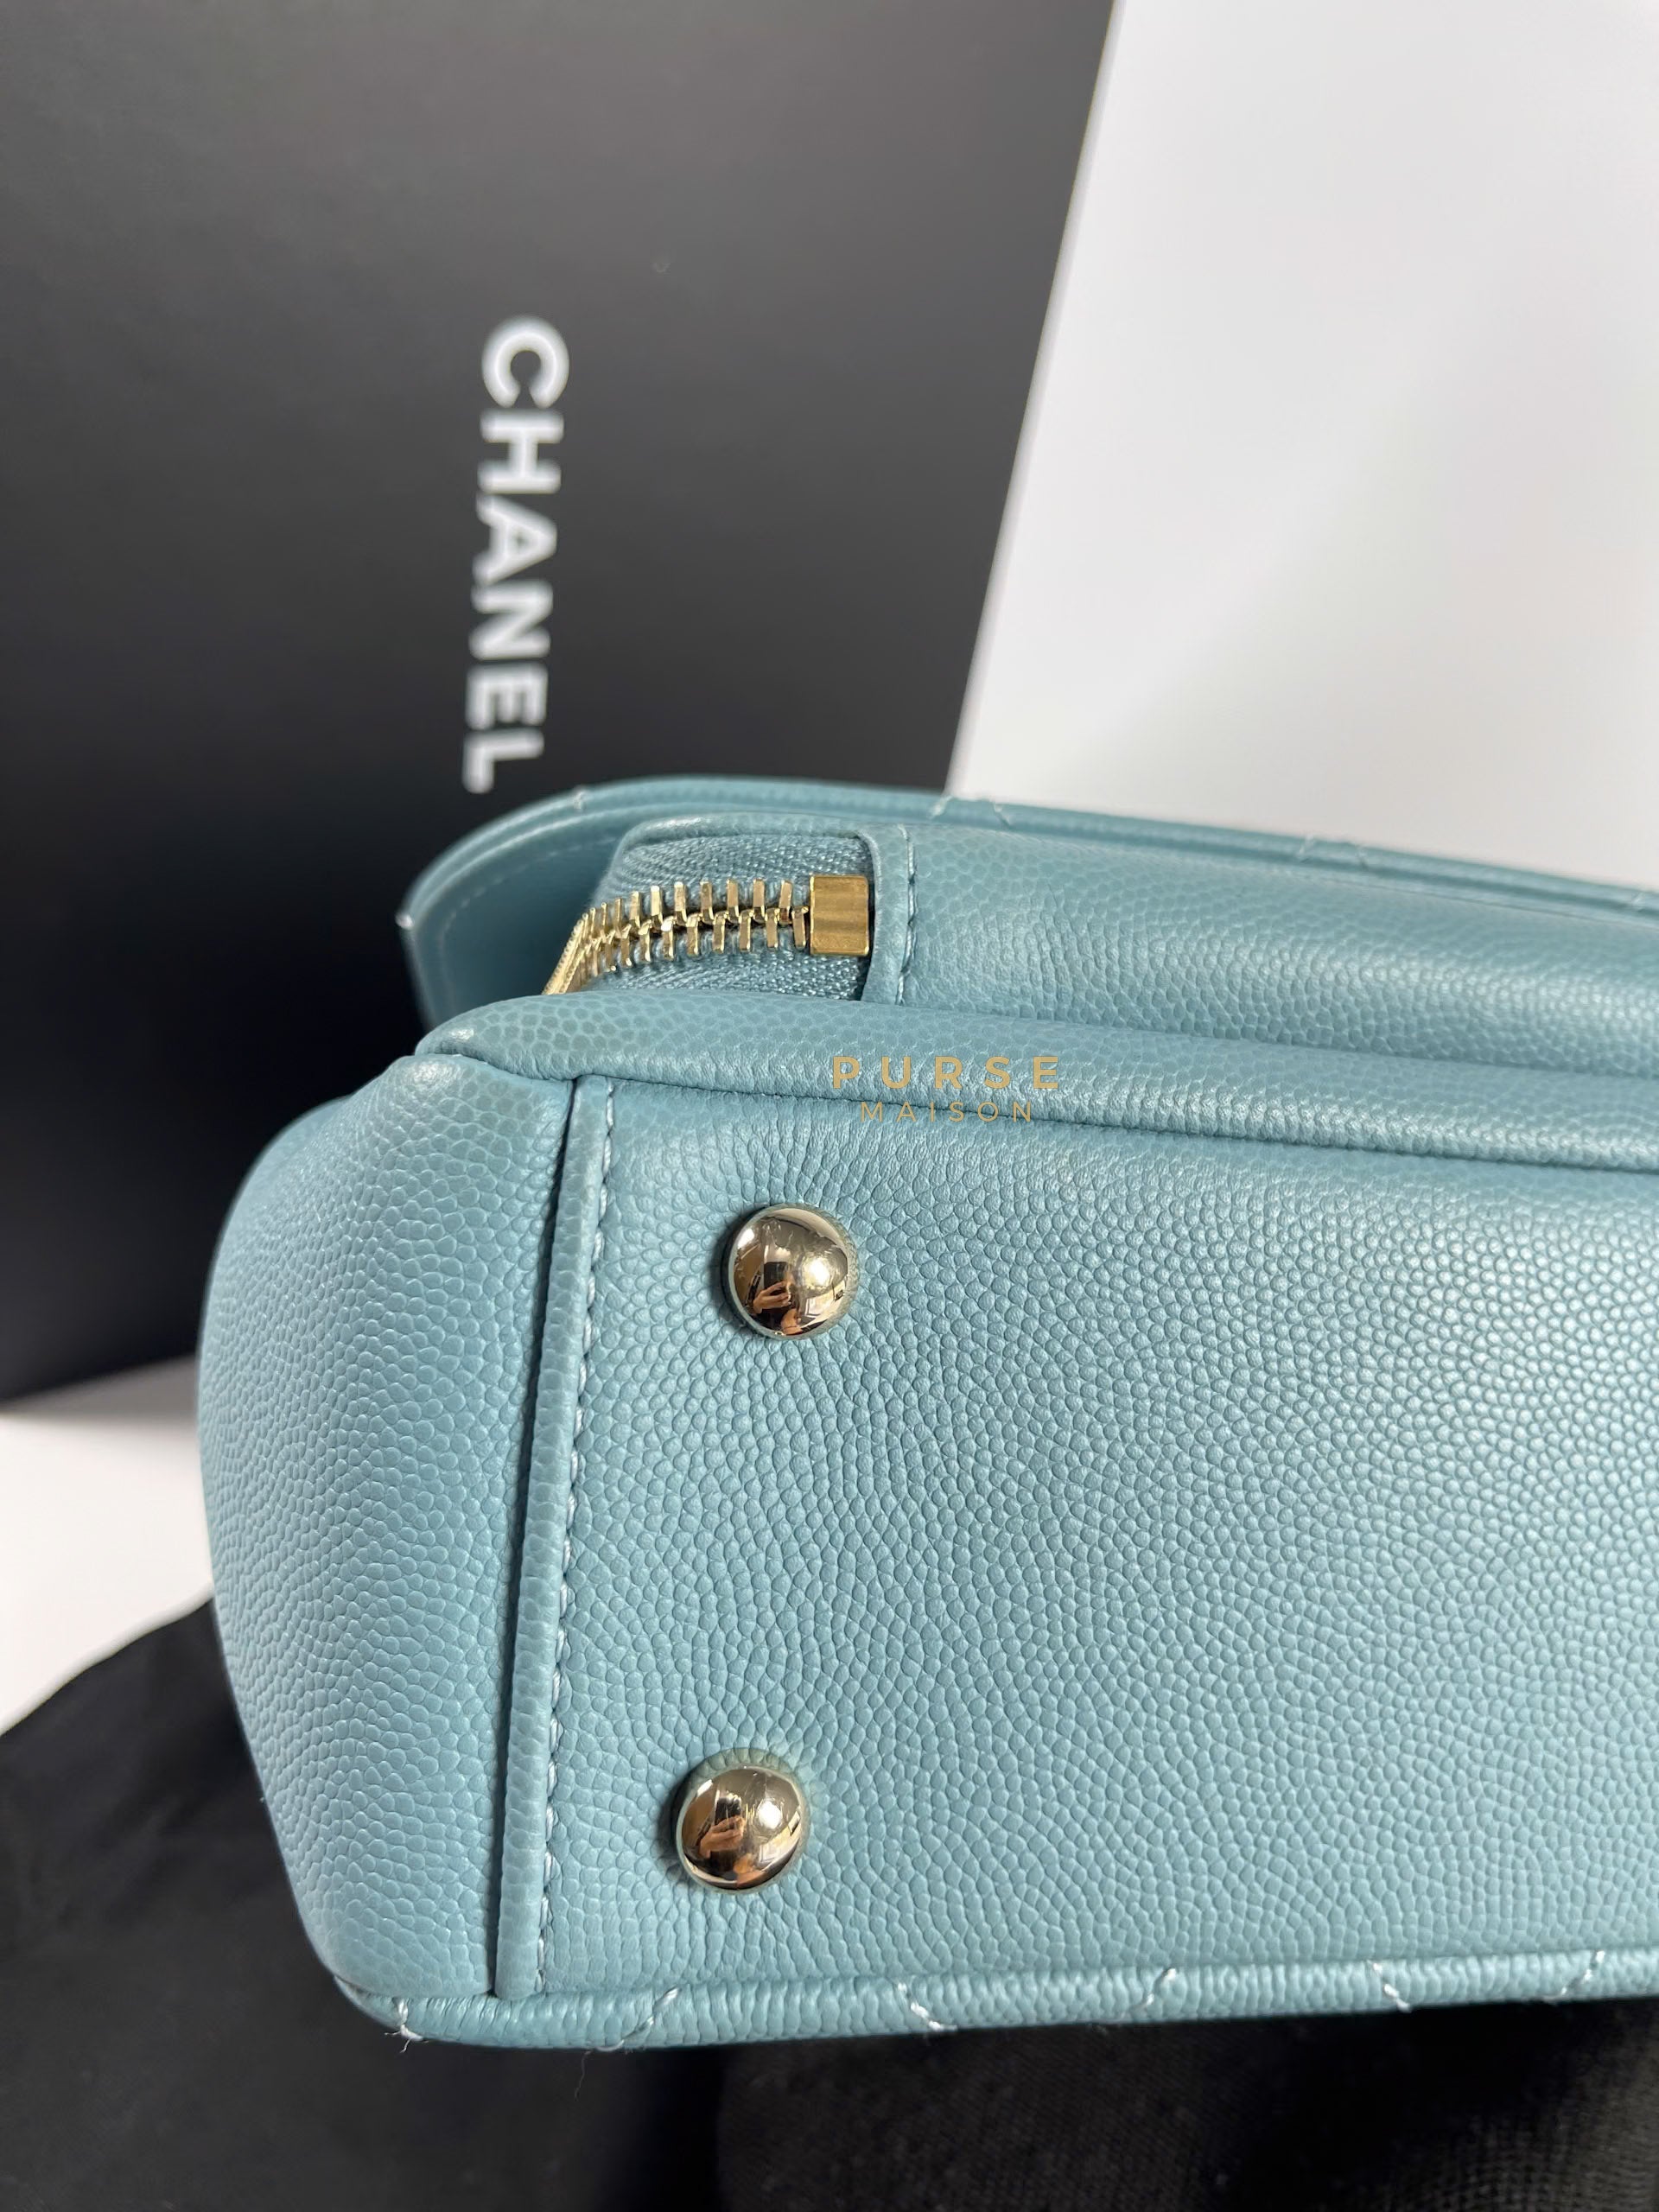 Business Affinity Small Tiffany blue Caviar & Light Gold Hardware Series 29 | Purse Maison Luxury Bags Shop